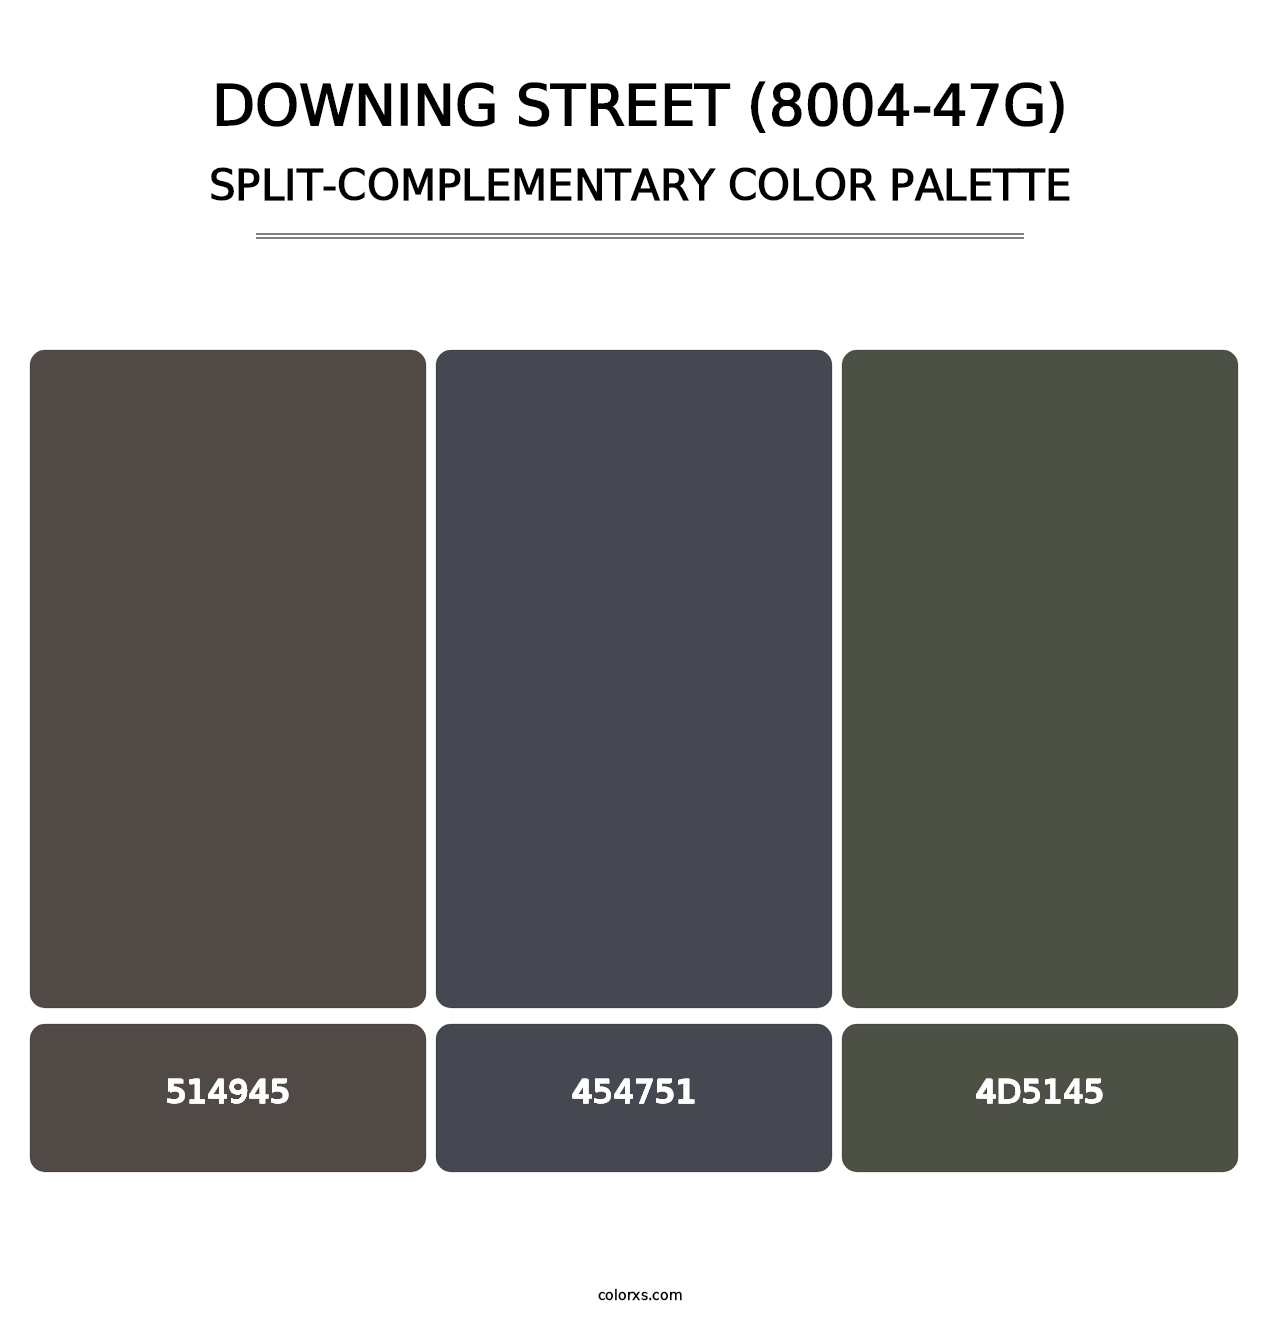 Downing Street (8004-47G) - Split-Complementary Color Palette